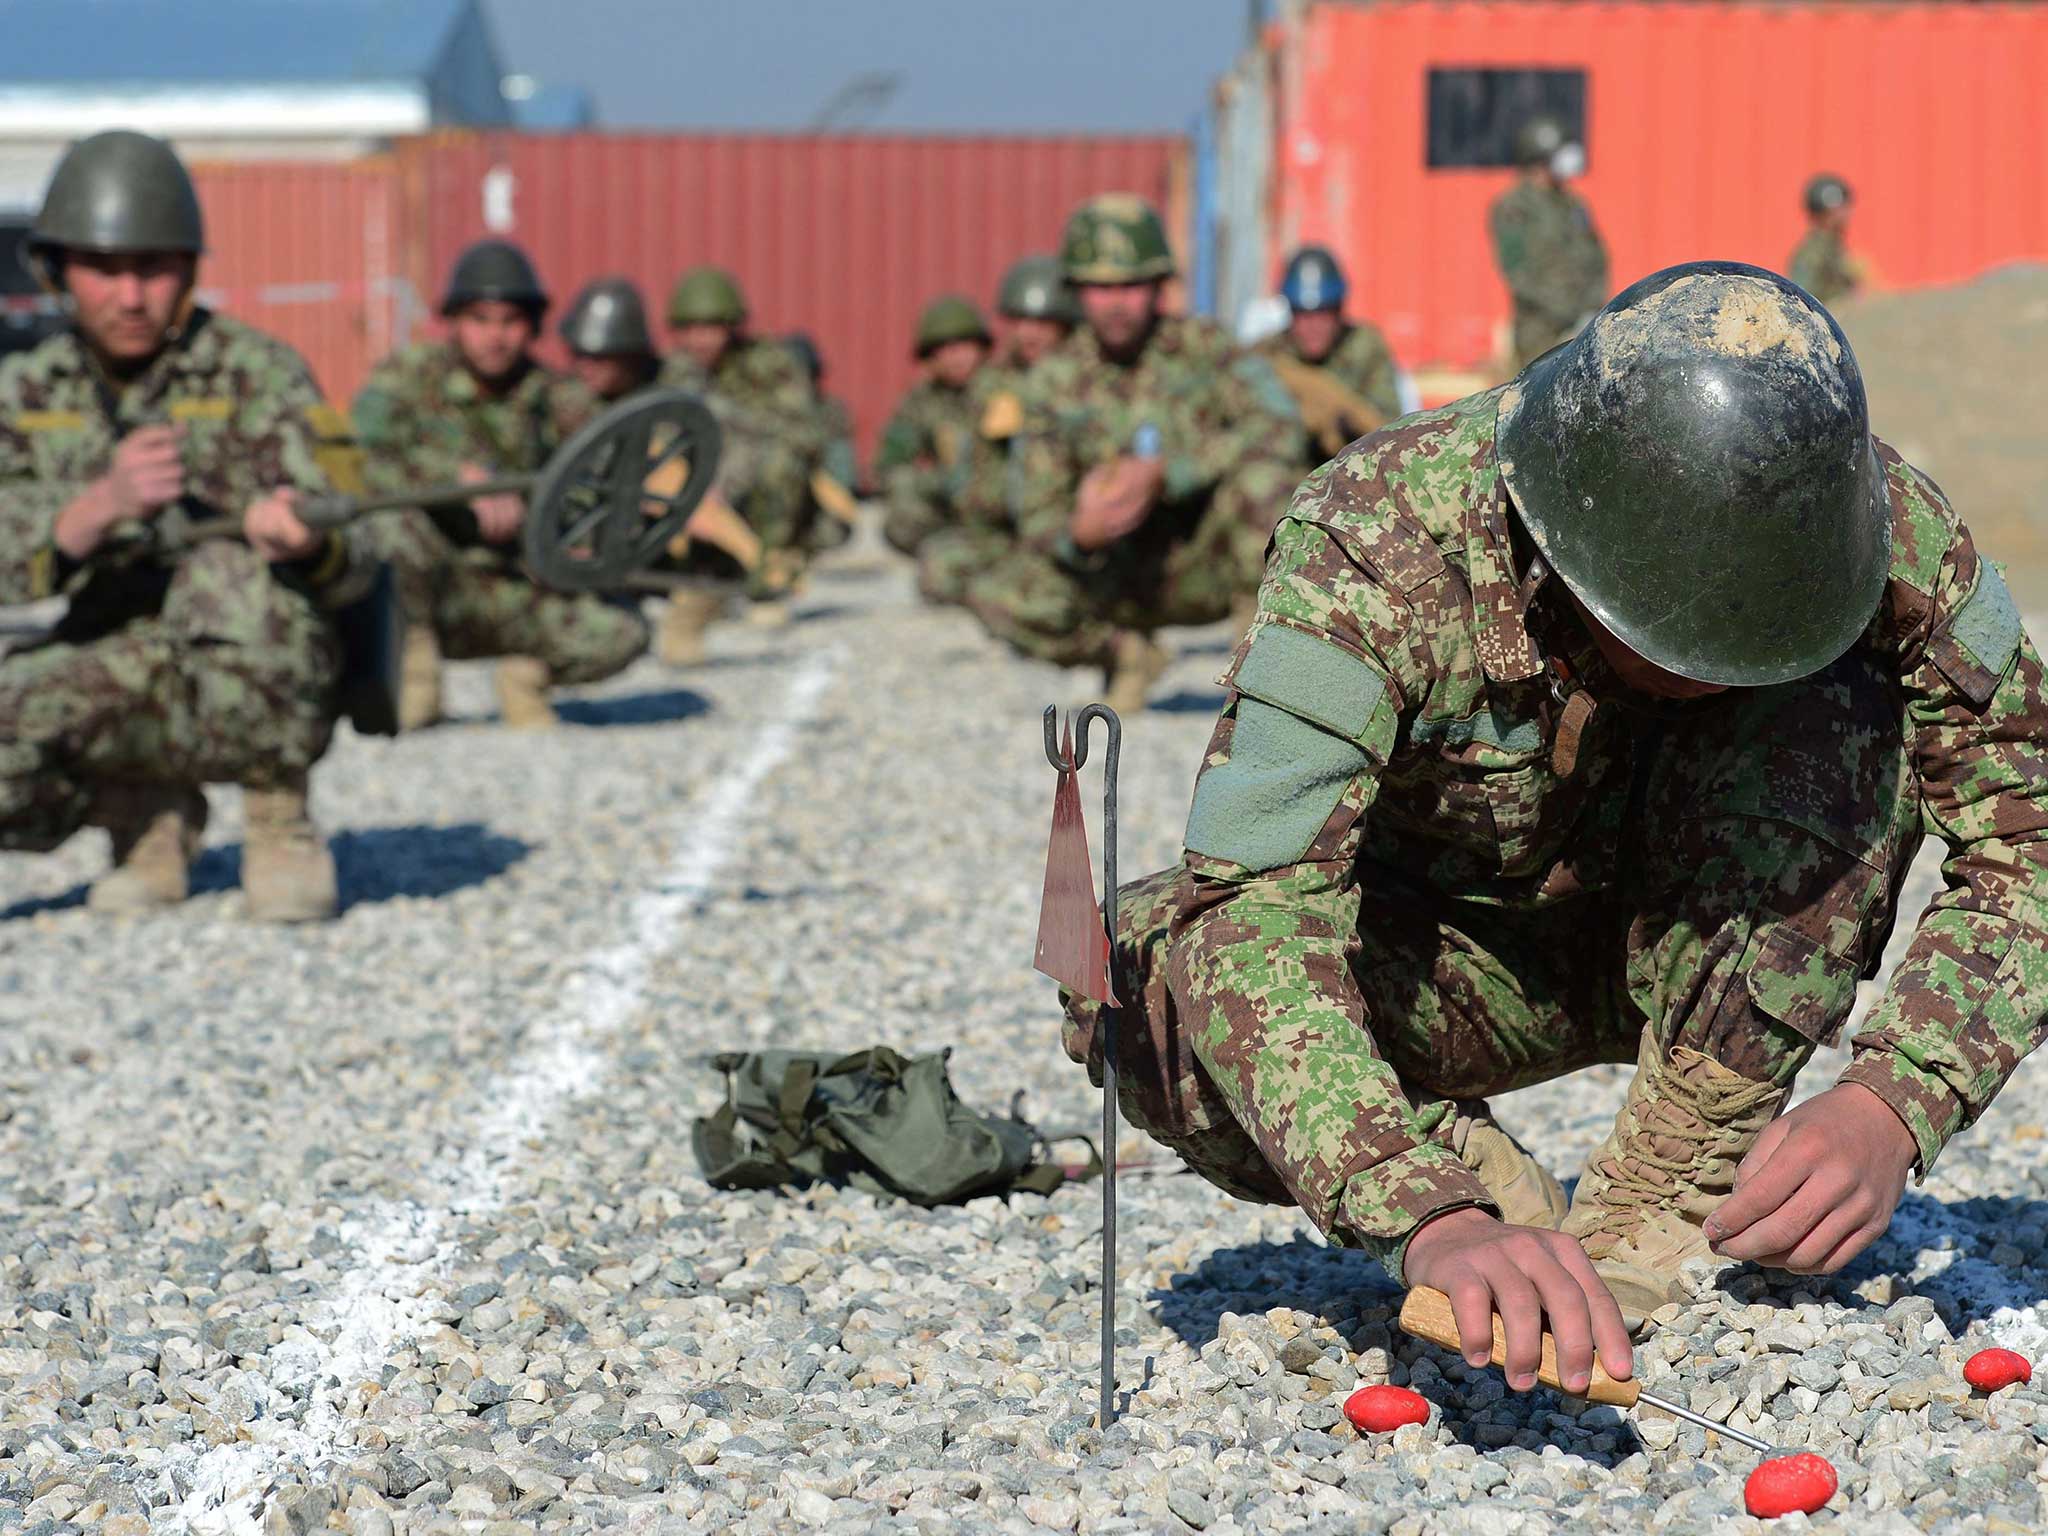 A member of the Afghan National Army practises detonating a mine